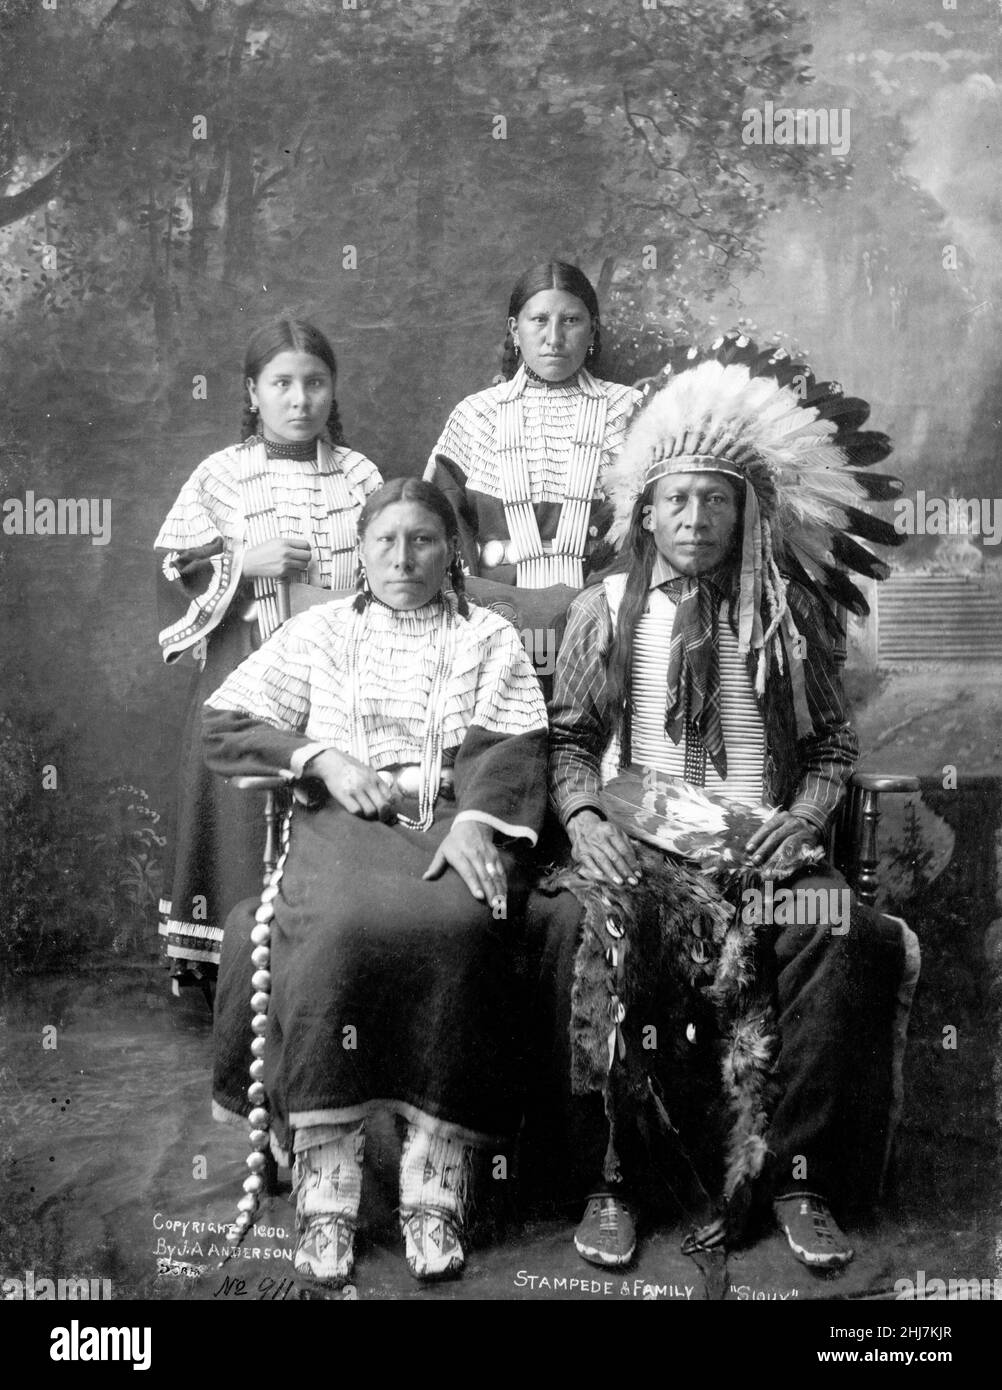 Stampede & family 'Sioux' / J.A. Anderson, Rosebud, S.D. c 1910. Stock Photo